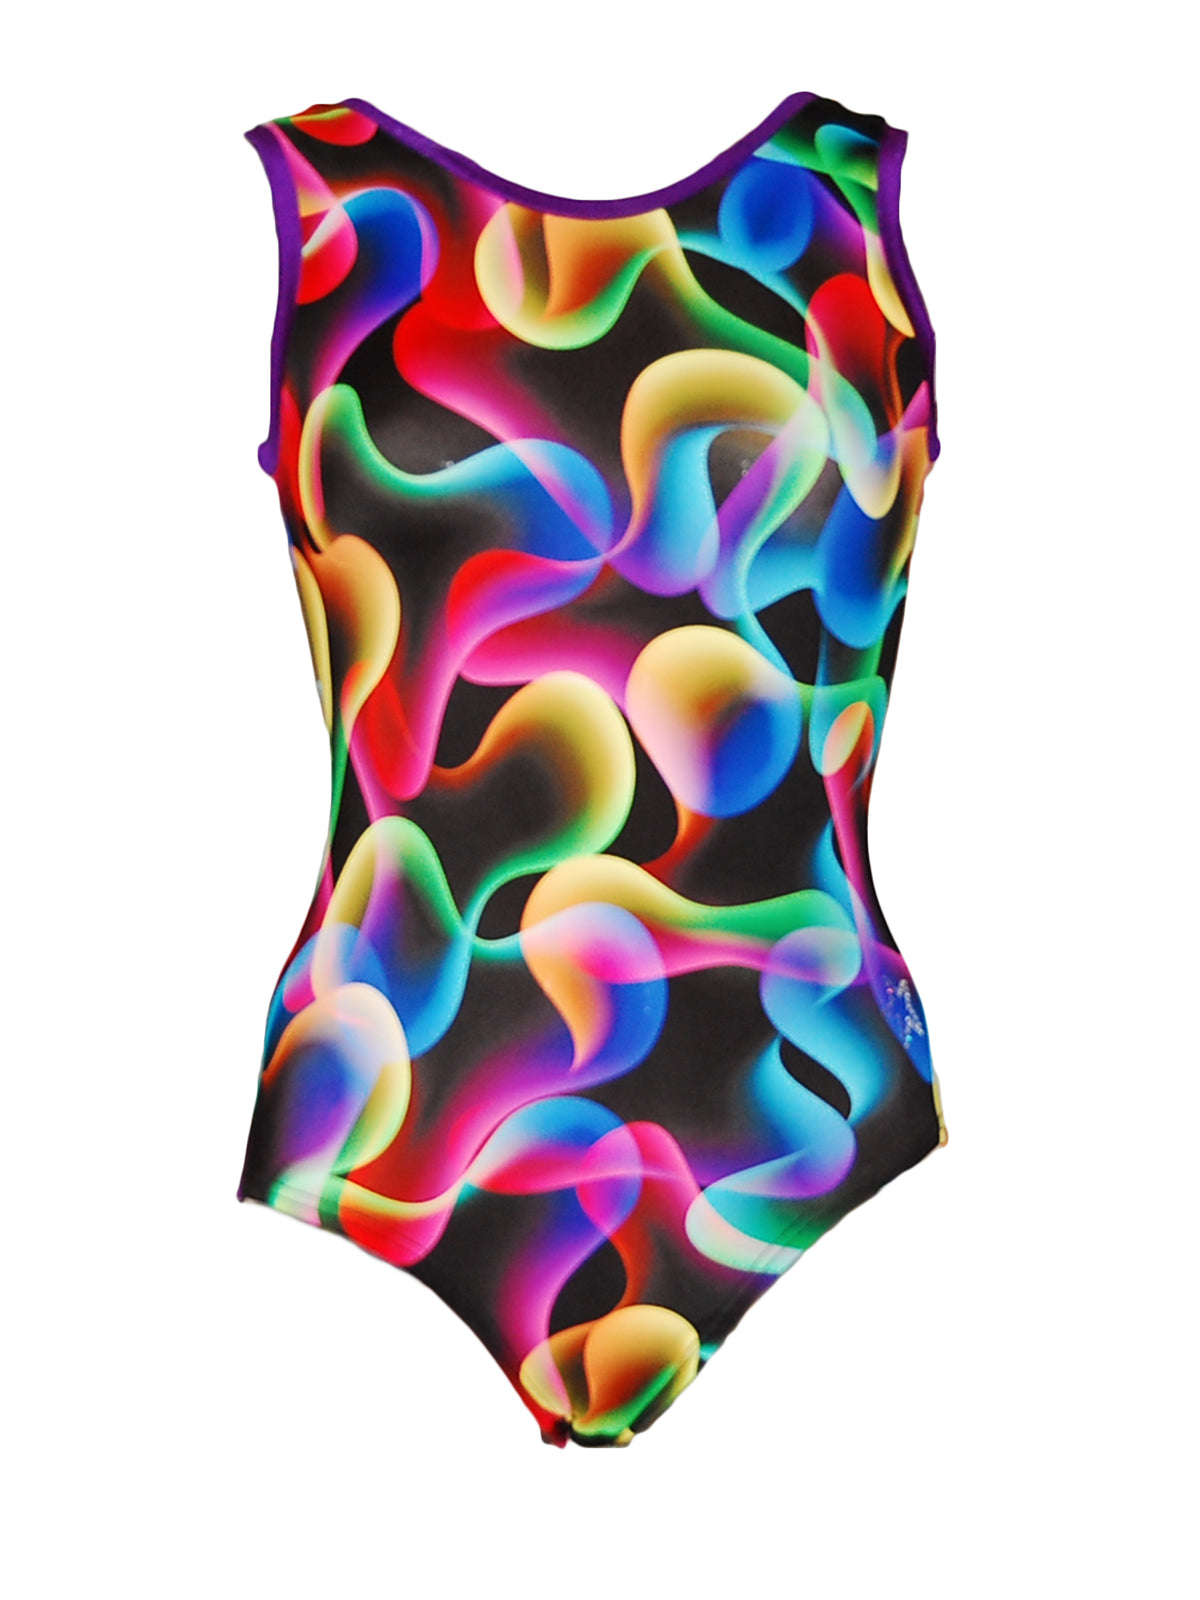 Front image of Tank style leotard